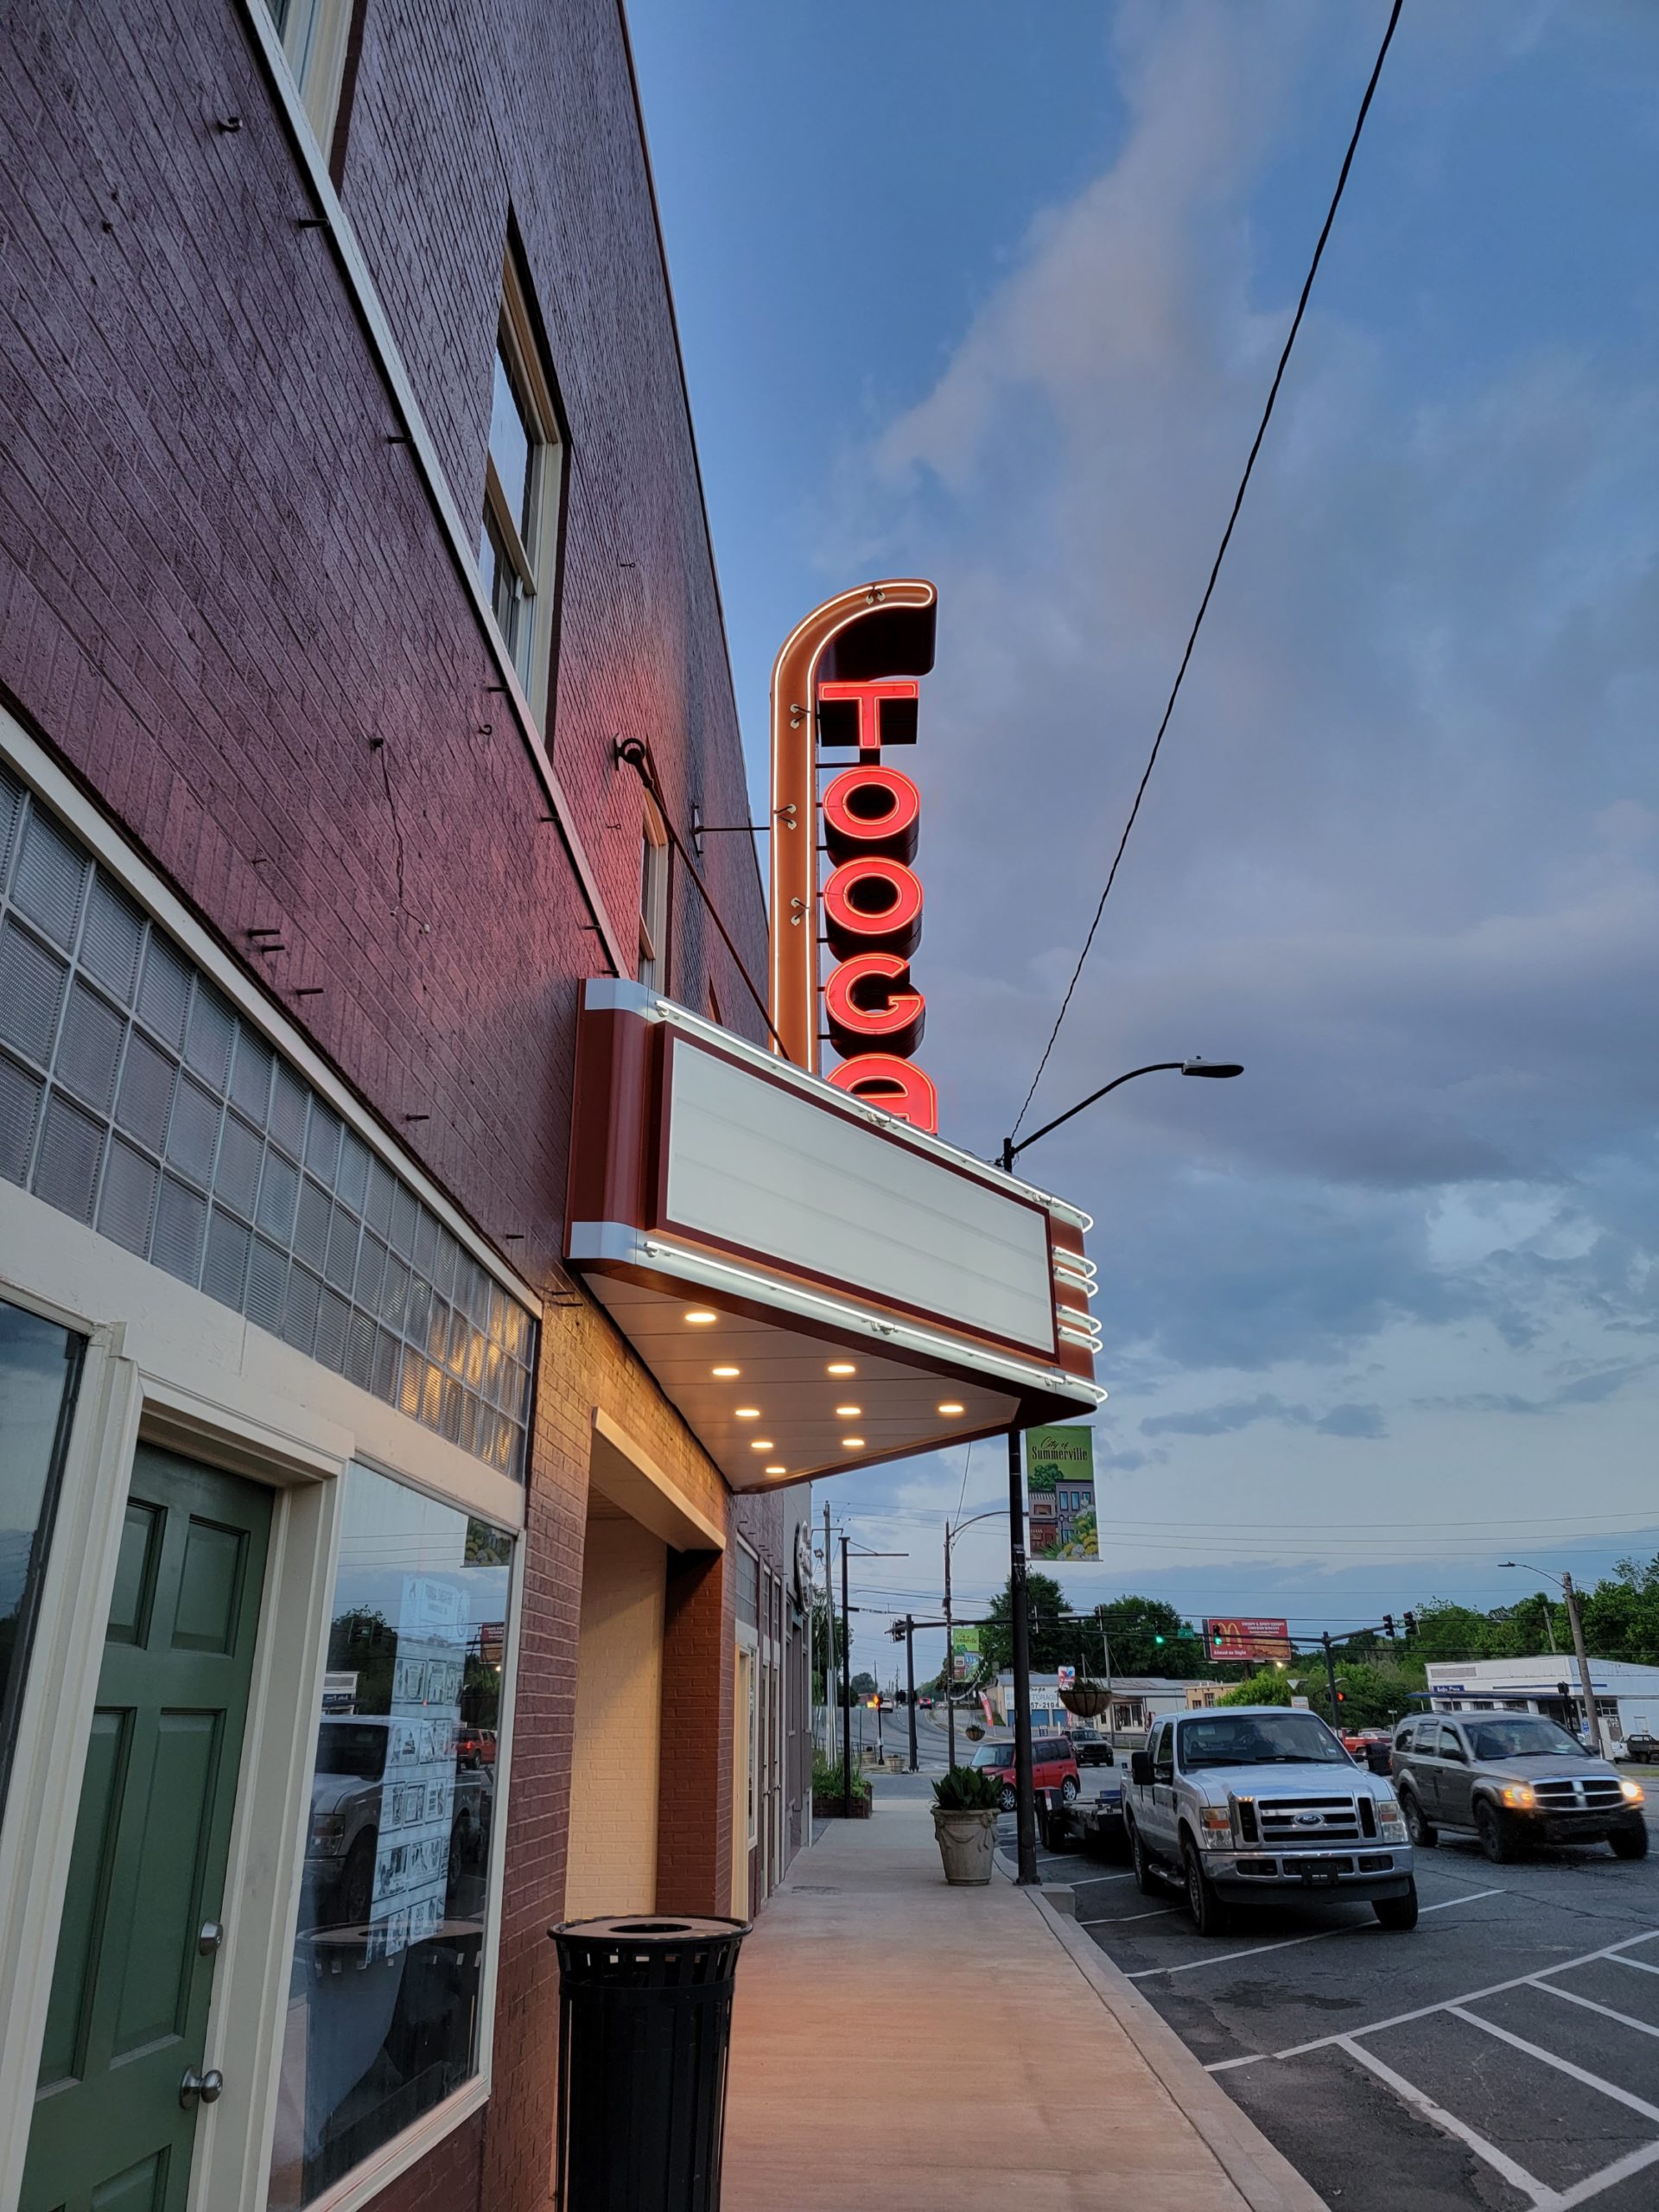 Marquee sign for Tooga Theatre in Summerville, GA done by Wagner Electric Sign Co.